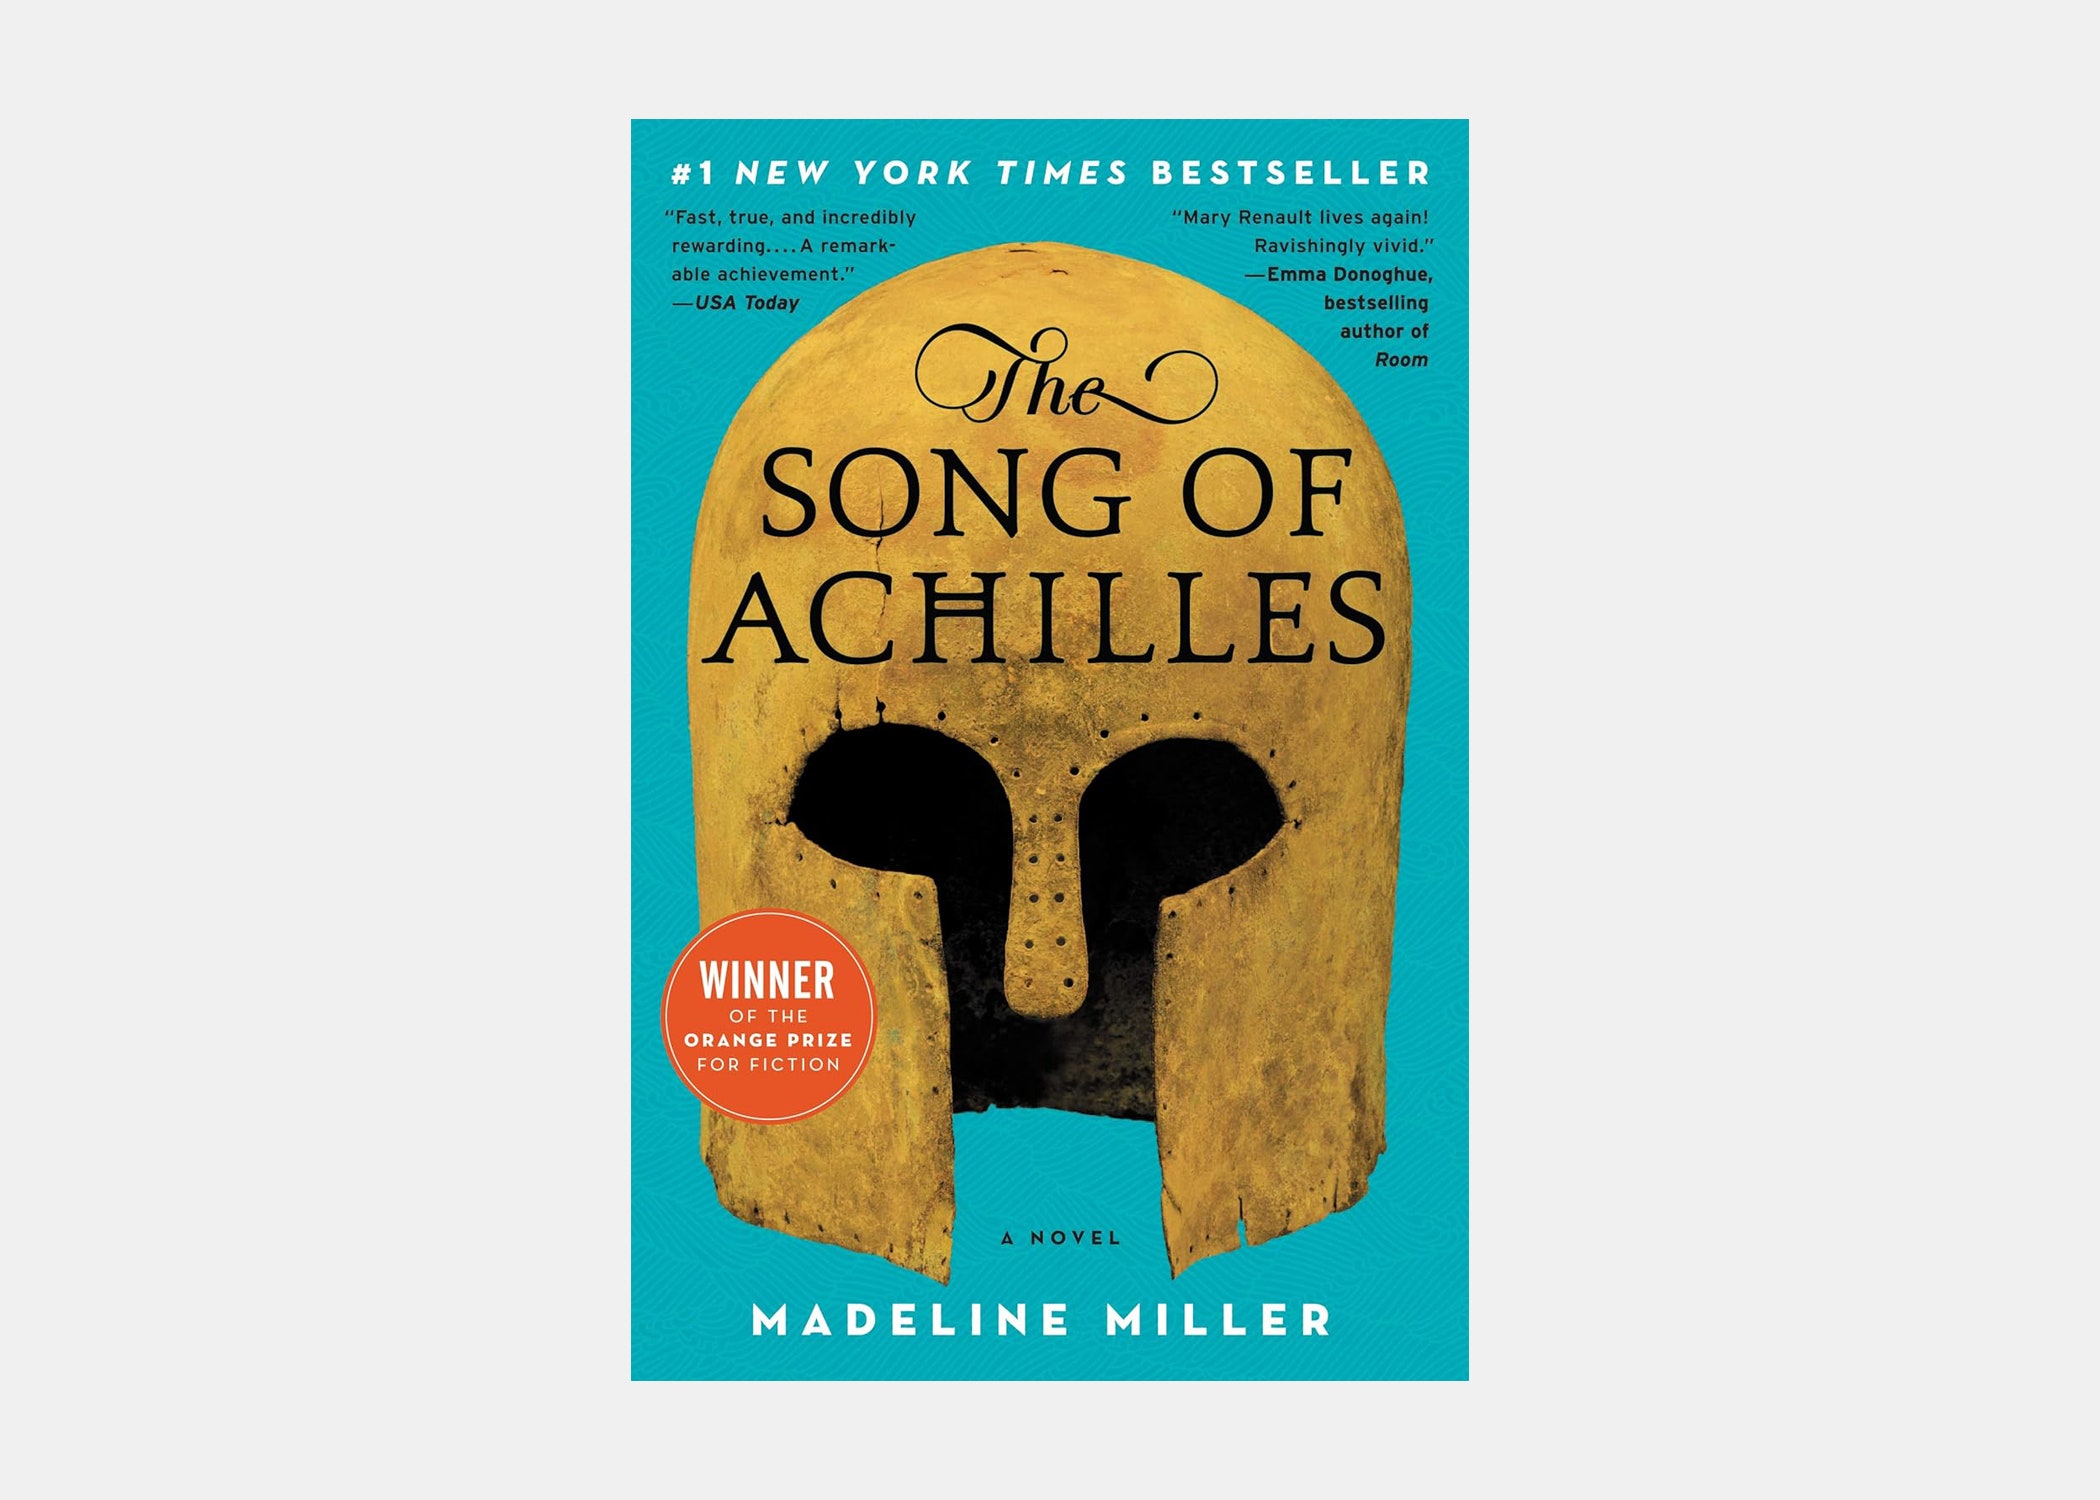 <p>If you’ve read Homer’s <em>Iliad,</em> you will appreciate Madeline Miller's creativity in <em>The Song of Achilles</em>. Told from the perspective of Patroclus, it tells the story of the Trojan War but centers on the relationship between Patroclus and Achilles. It’s as much a love story as it is a fantasy novel. It’s a perfect read for your next flight to <a href="https://www.cntraveler.com/tag/greece?mbid=synd_msn_rss&utm_source=msn&utm_medium=syndication">Greece</a>.</p> <p><strong>Page count:</strong> 378</p> <p><strong>Average read time:</strong> 5 hours and 46 minutes</p> $13, Amazon. <a href="https://www.amazon.com/Song-Achilles-Novel-Madeline-Miller/dp/0062060627/ref=sr_1_1">Get it now!</a><p>Sign up to receive the latest news, expert tips, and inspiration on all things travel</p><a href="https://www.cntraveler.com/newsletter/the-daily?sourceCode=msnsend">Inspire Me</a>